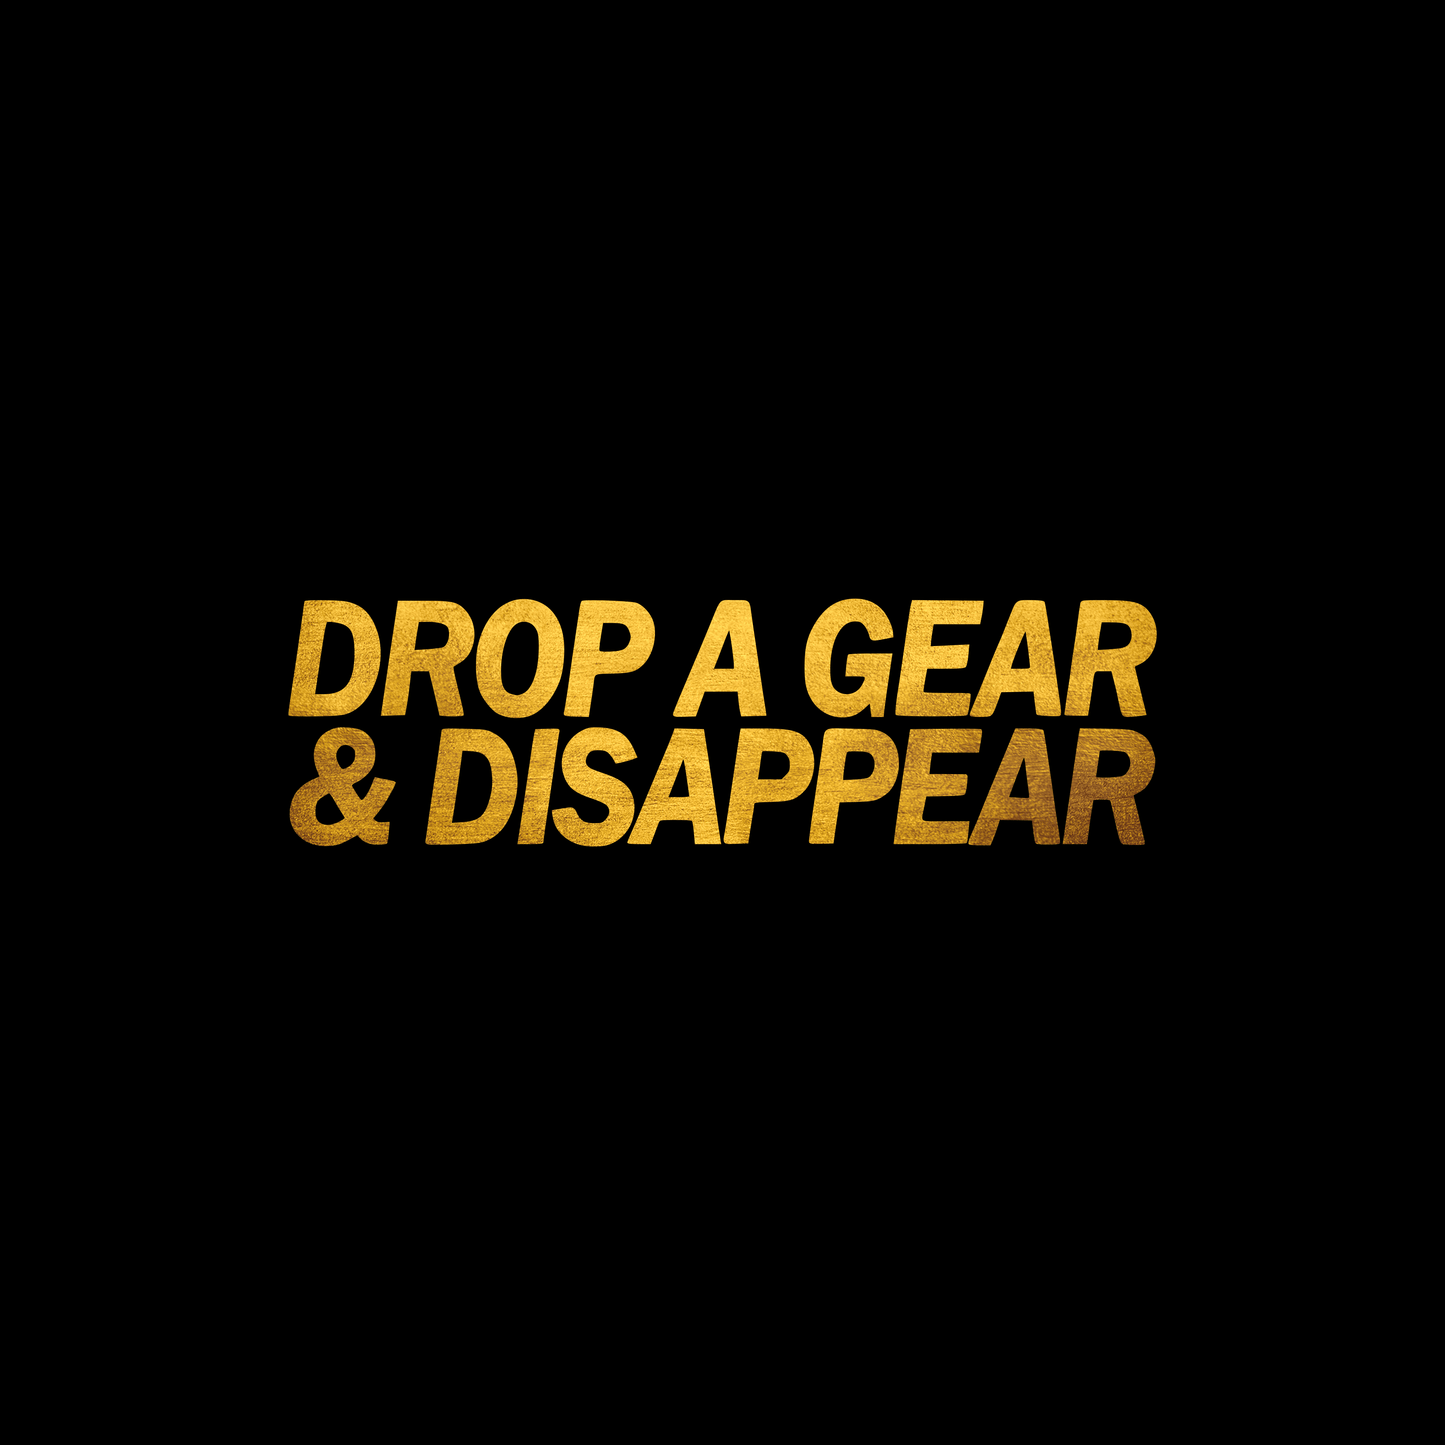 Drop a gear and disappear sticker decal